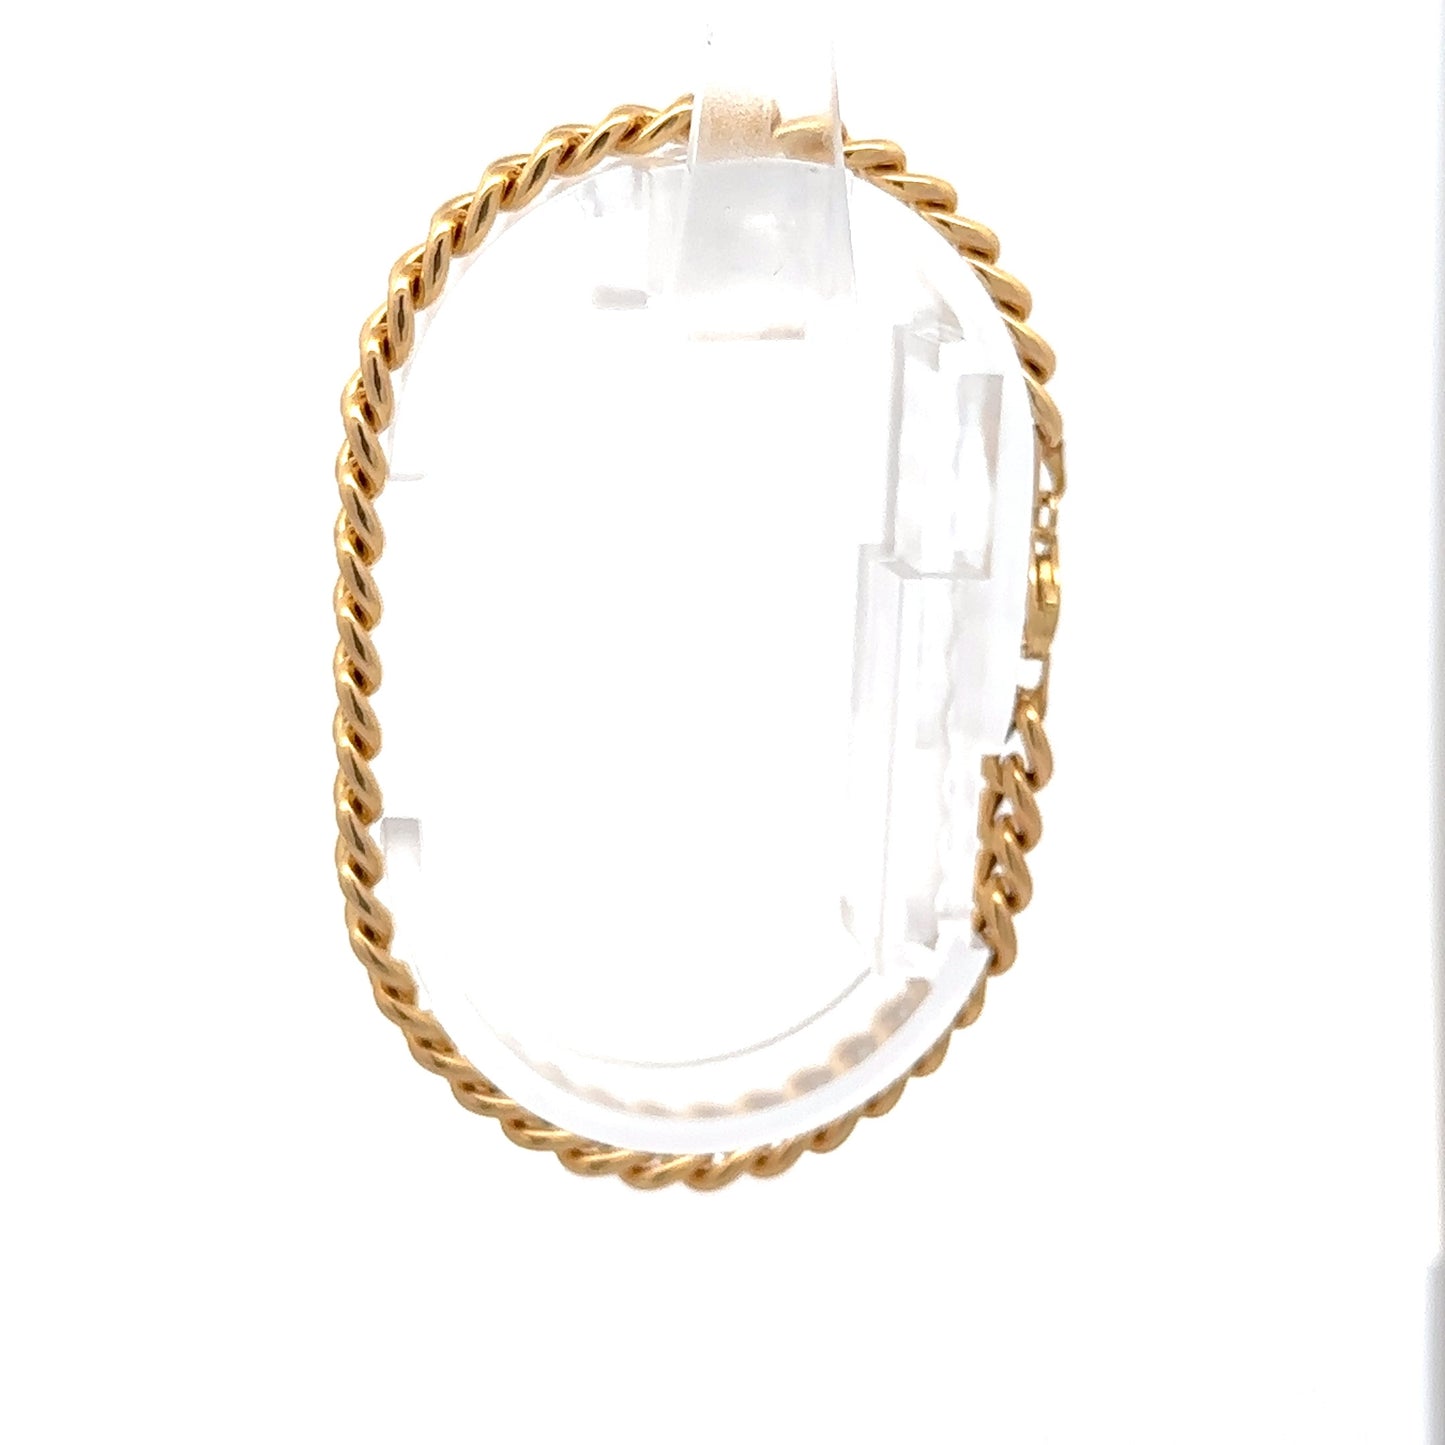 Pictured: The side of the 14K yellow gold link bracelet.